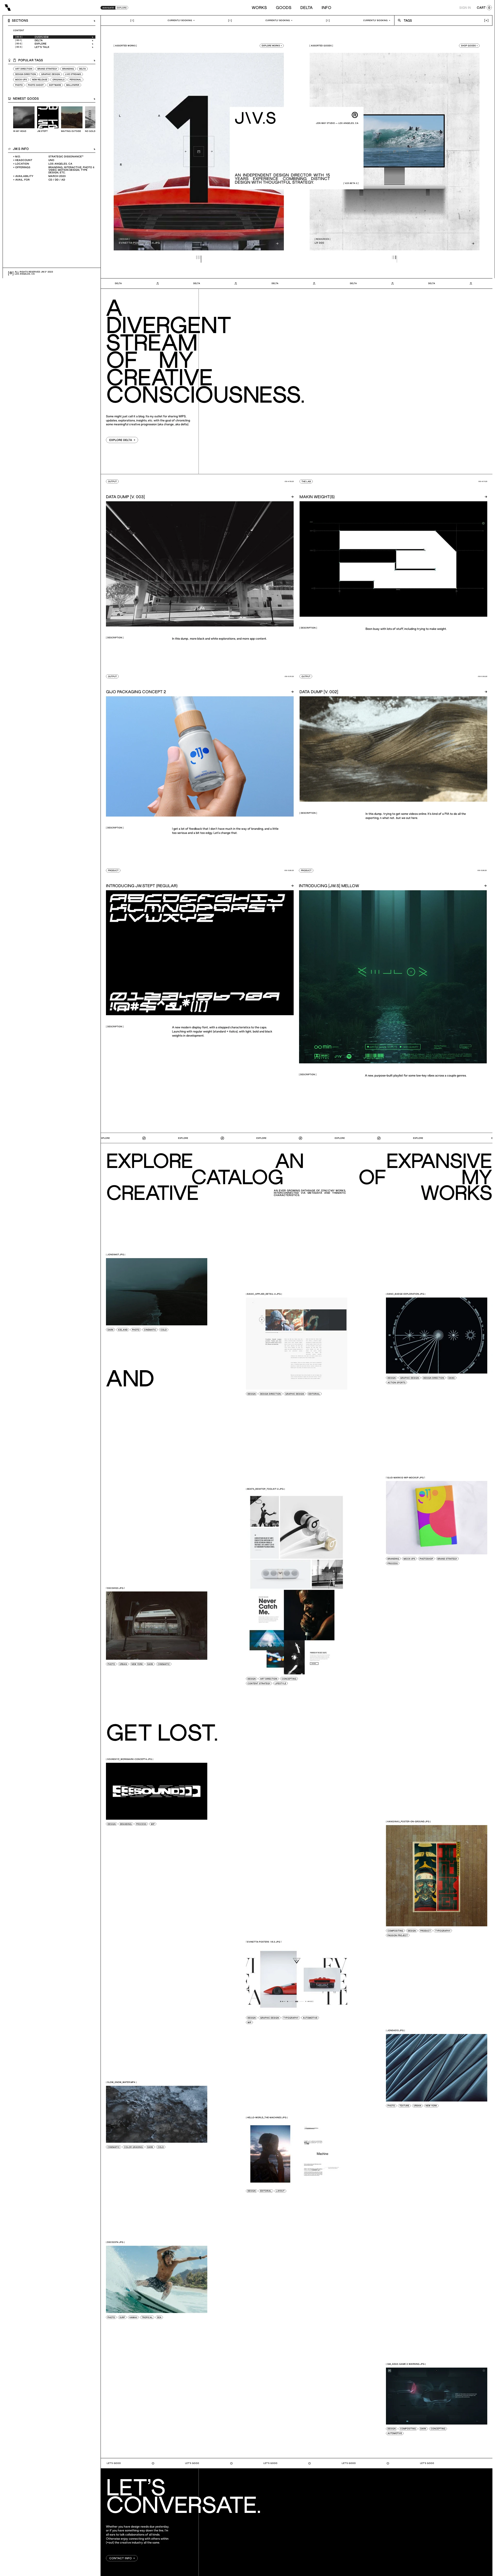 JW.S Landing Page Example: JON WAY studio. A one-man creative studio with ±15 years of experience combining distinct designs with thoughtful strategies.